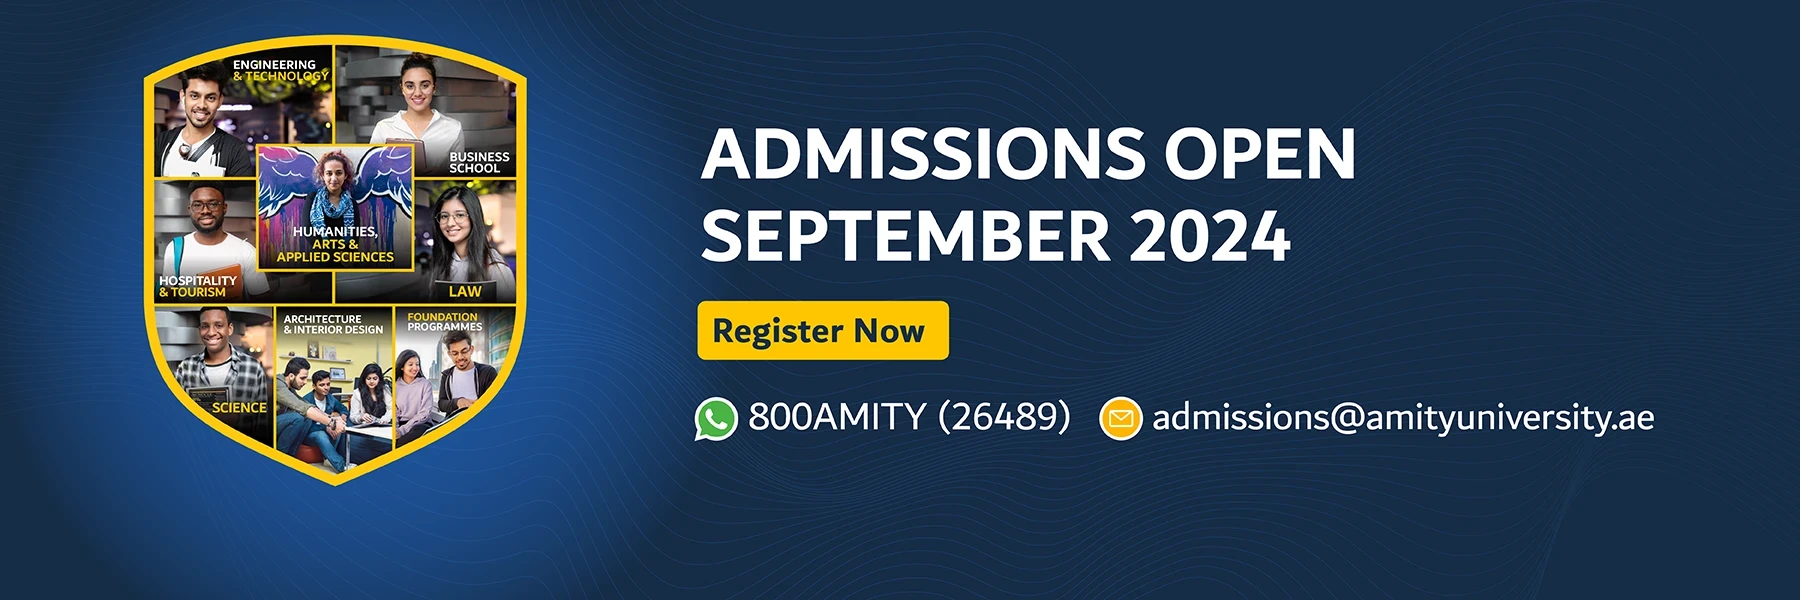 Admissions Open September D